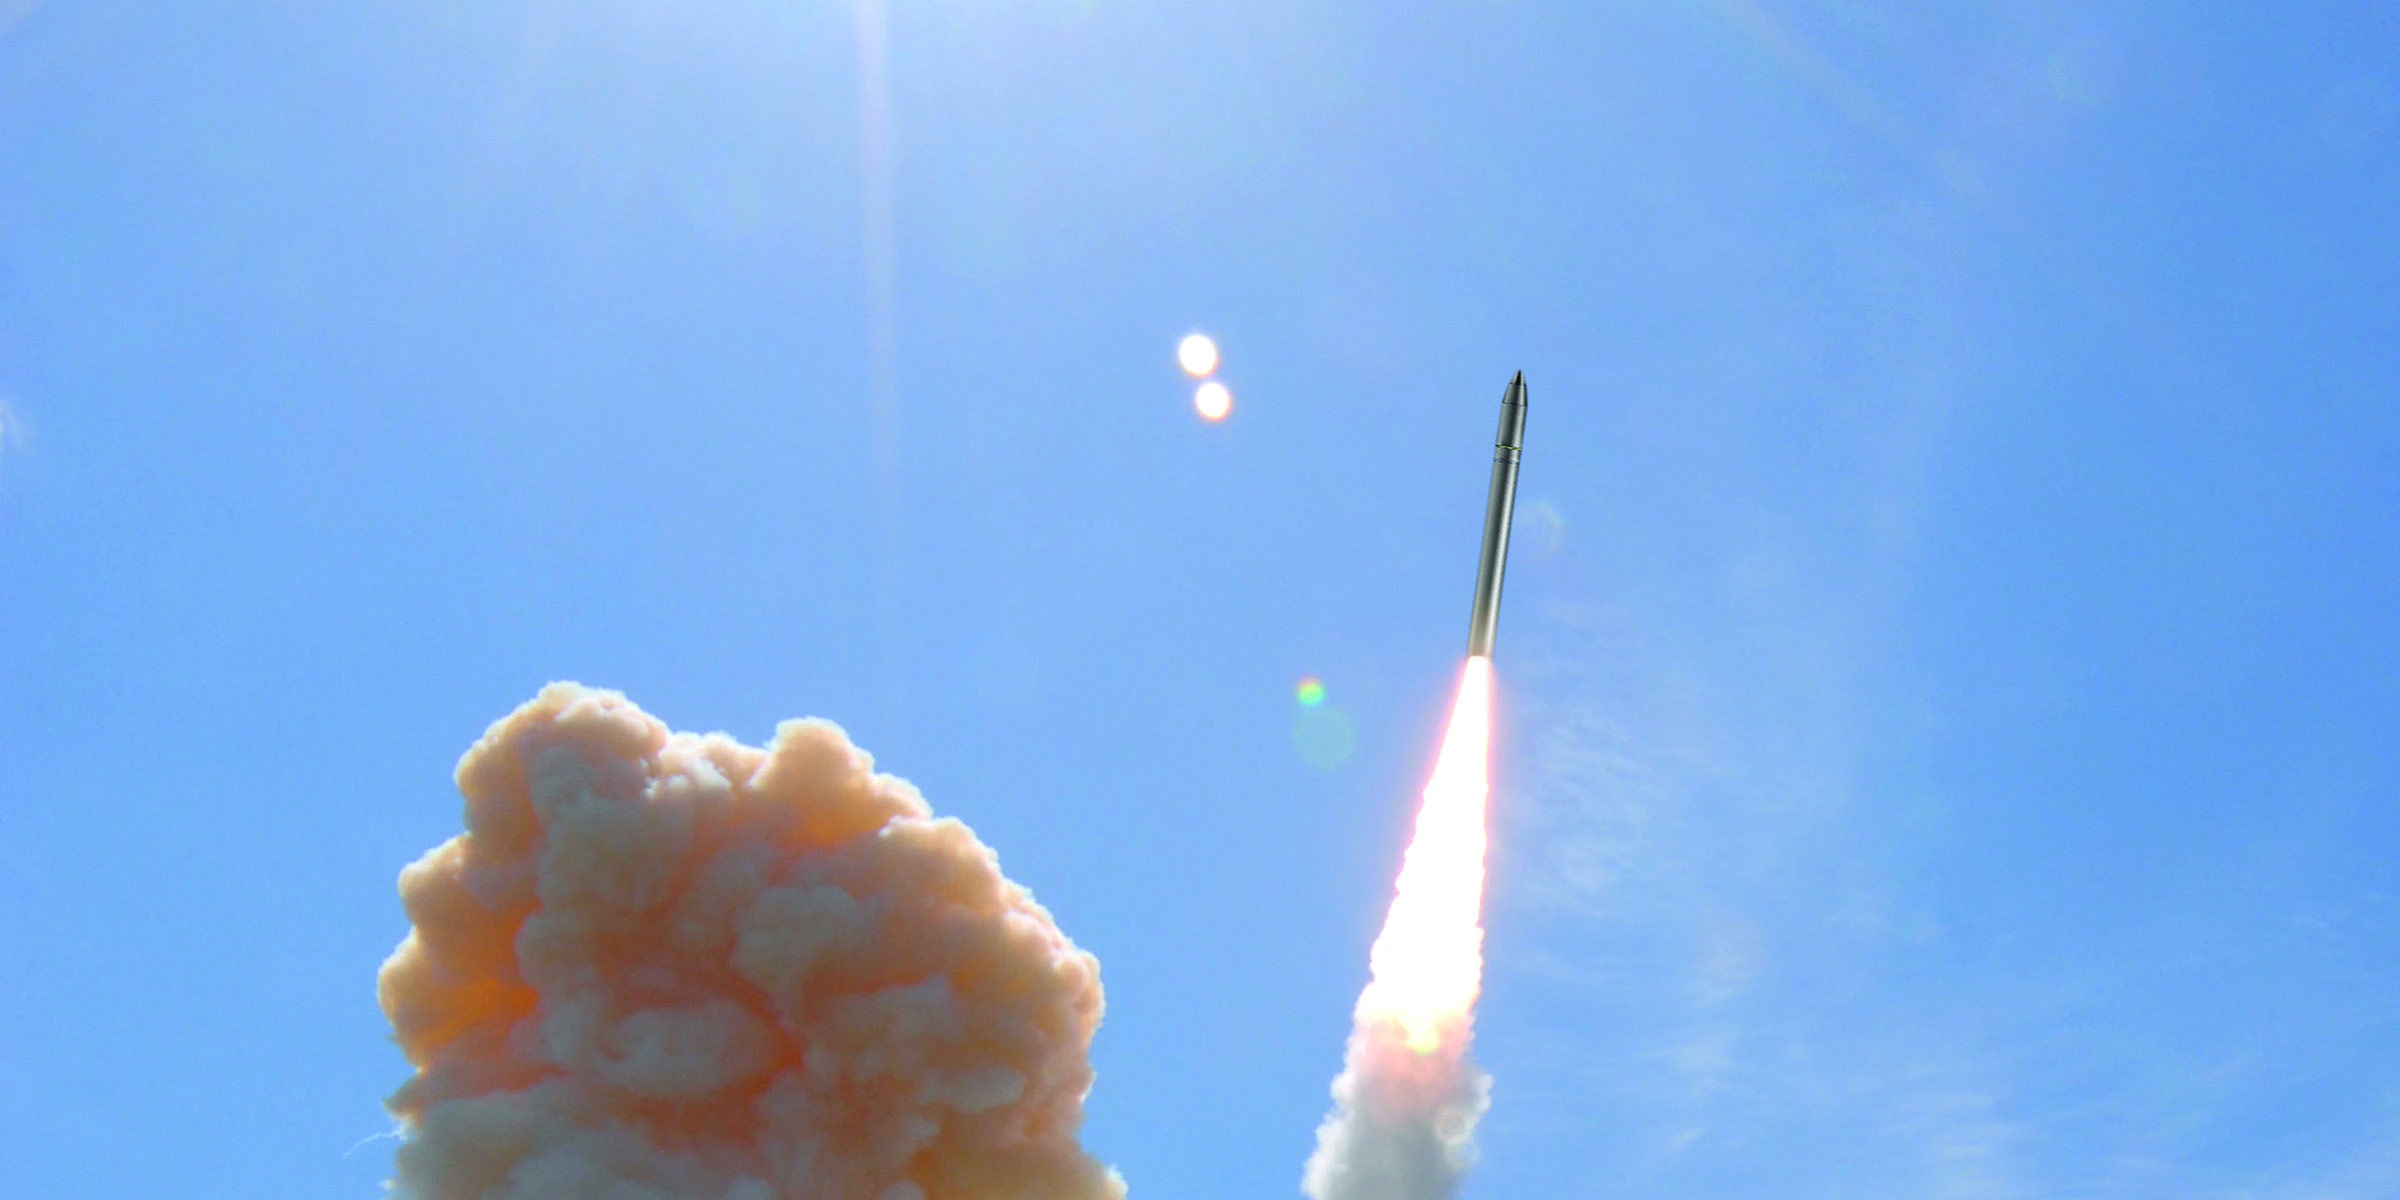 missile launch in clear blue sky